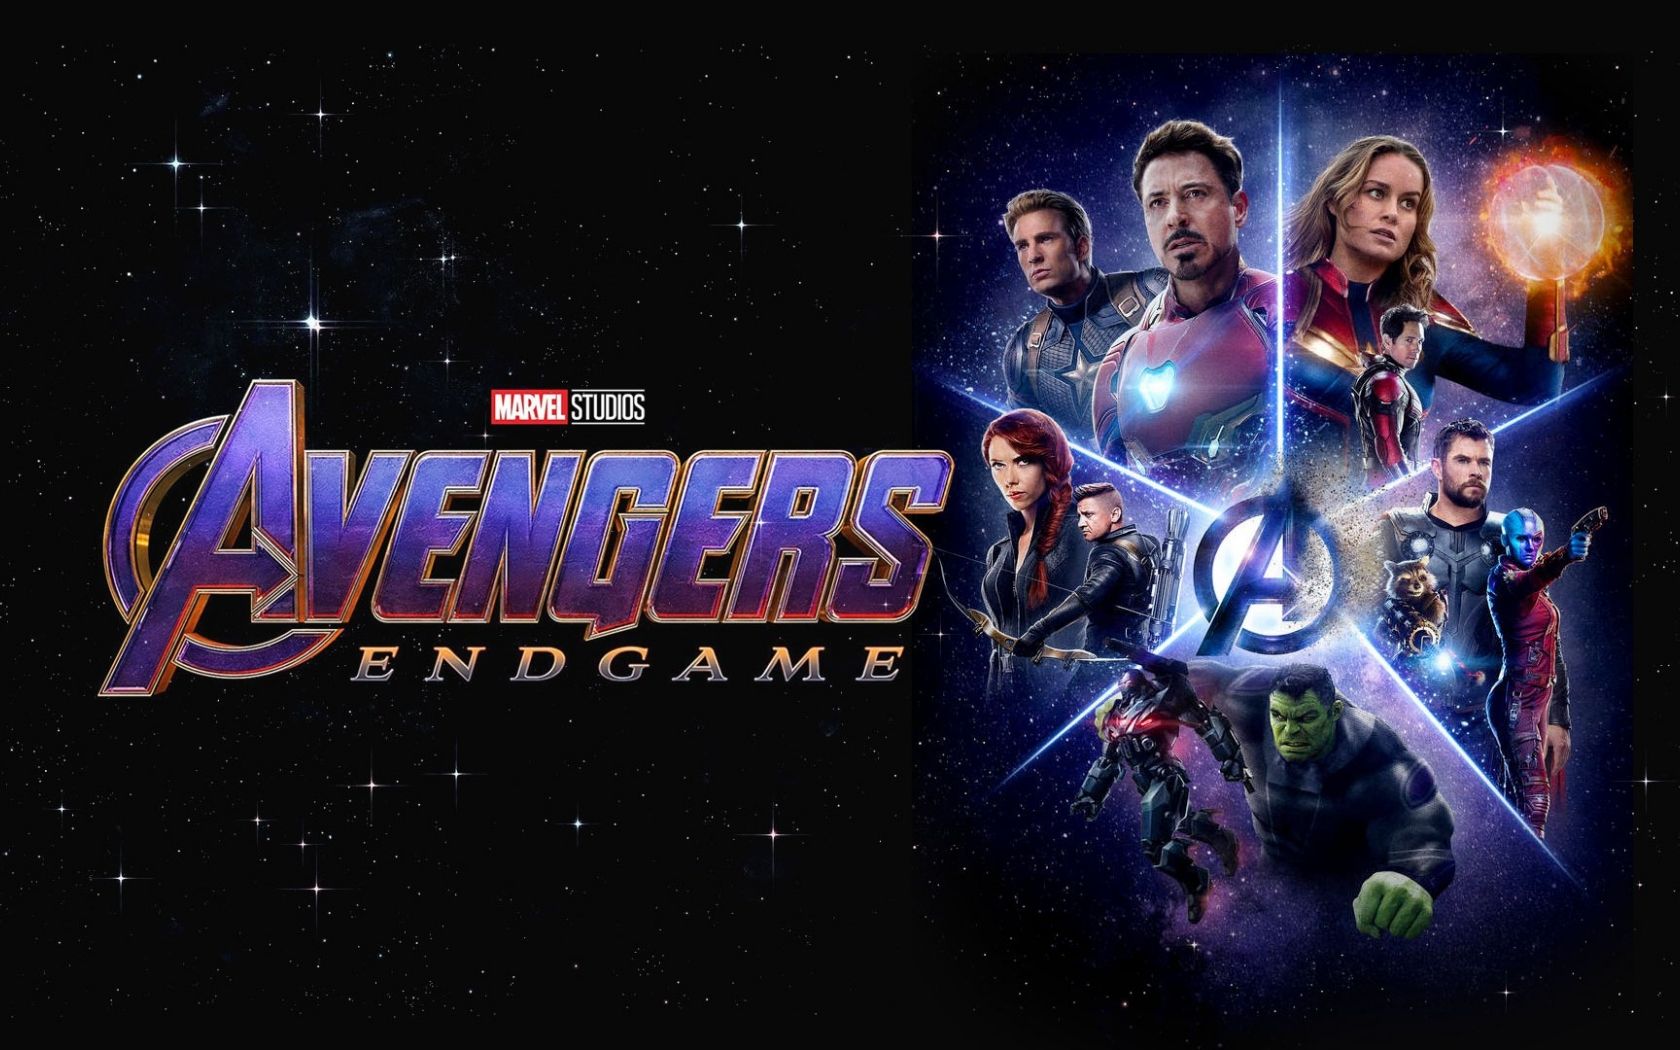 Free download Avengers Endgame 2019 Background 2019 Movie Poster